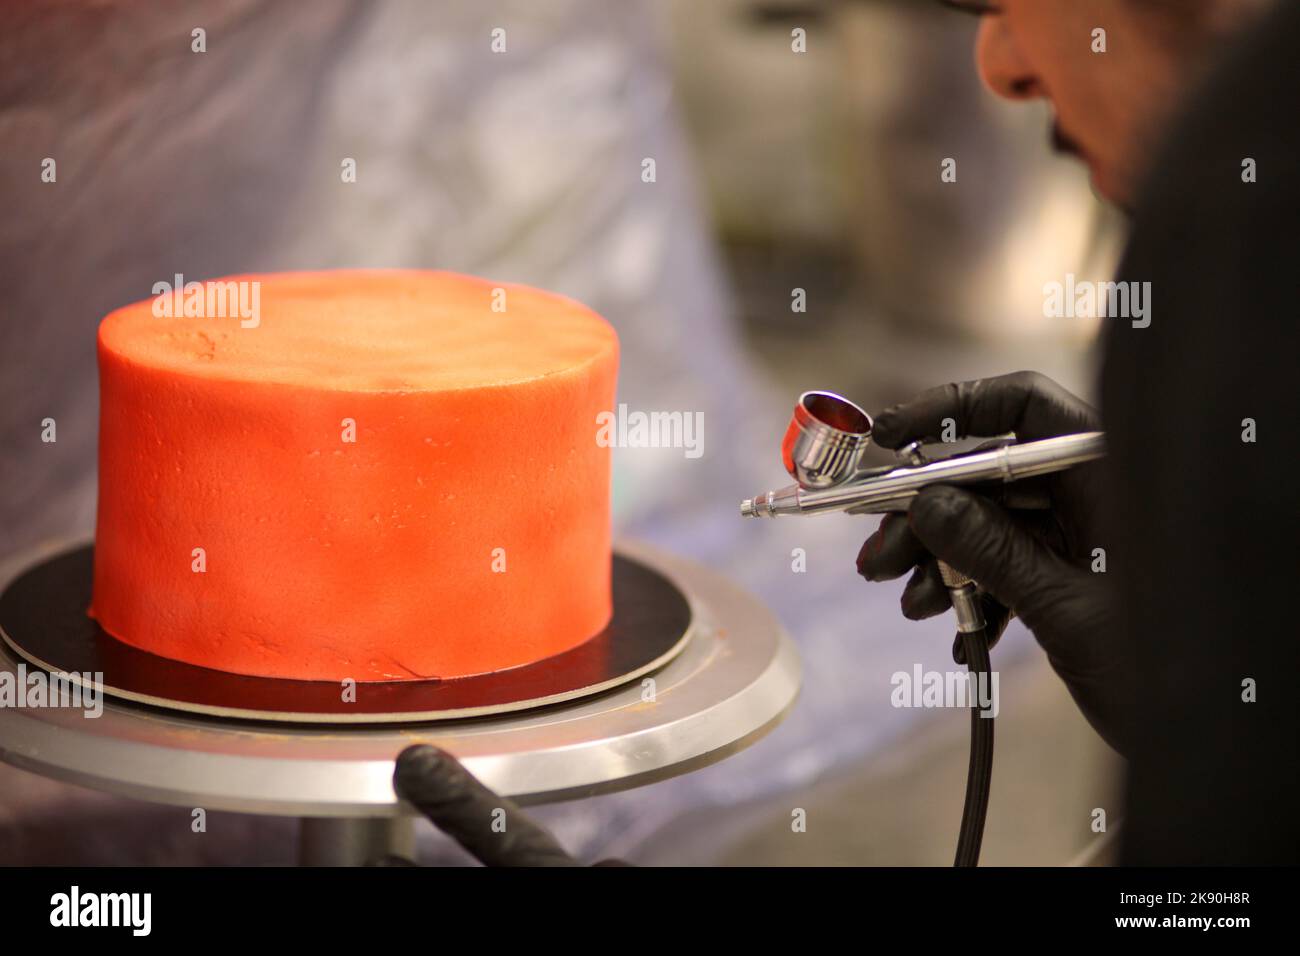 cook preparing a red frosted cake using air bush Stock Photo